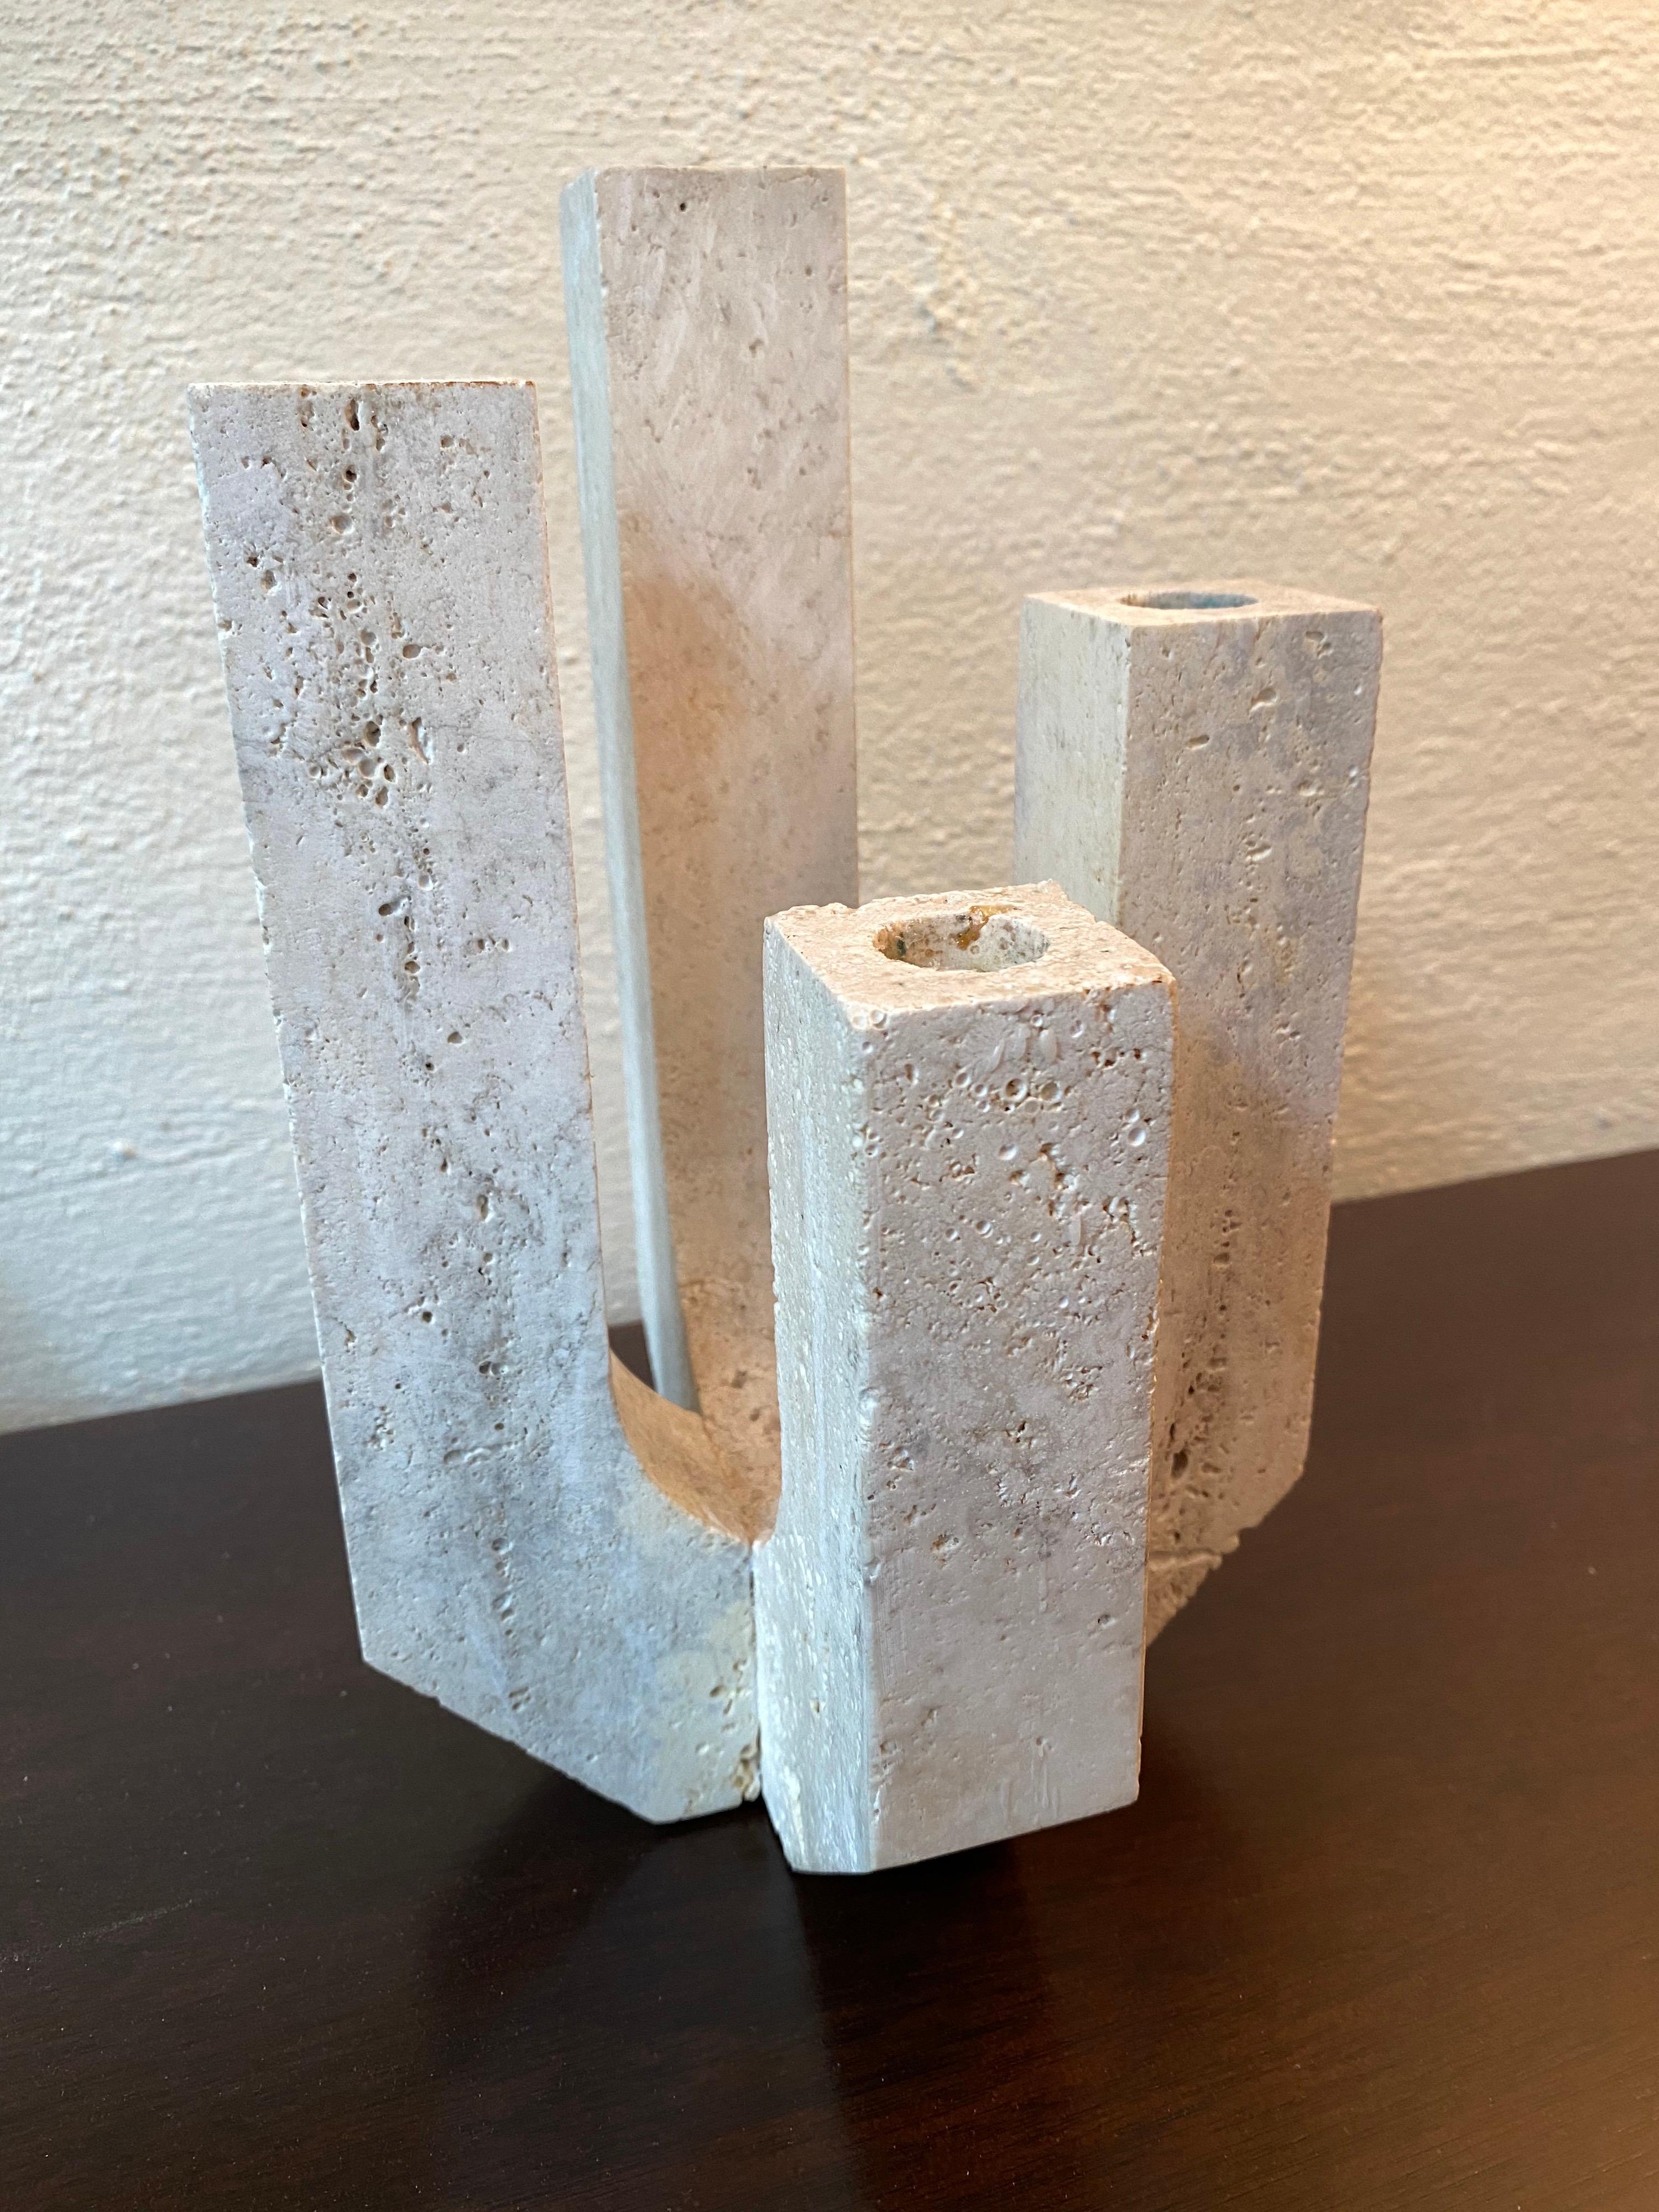 Fratelli Mannelli travertine 4 arm candlestick in travertine. Sculptural form, nicely crafted! I've seen these before with a Raymor Label who was an importer.